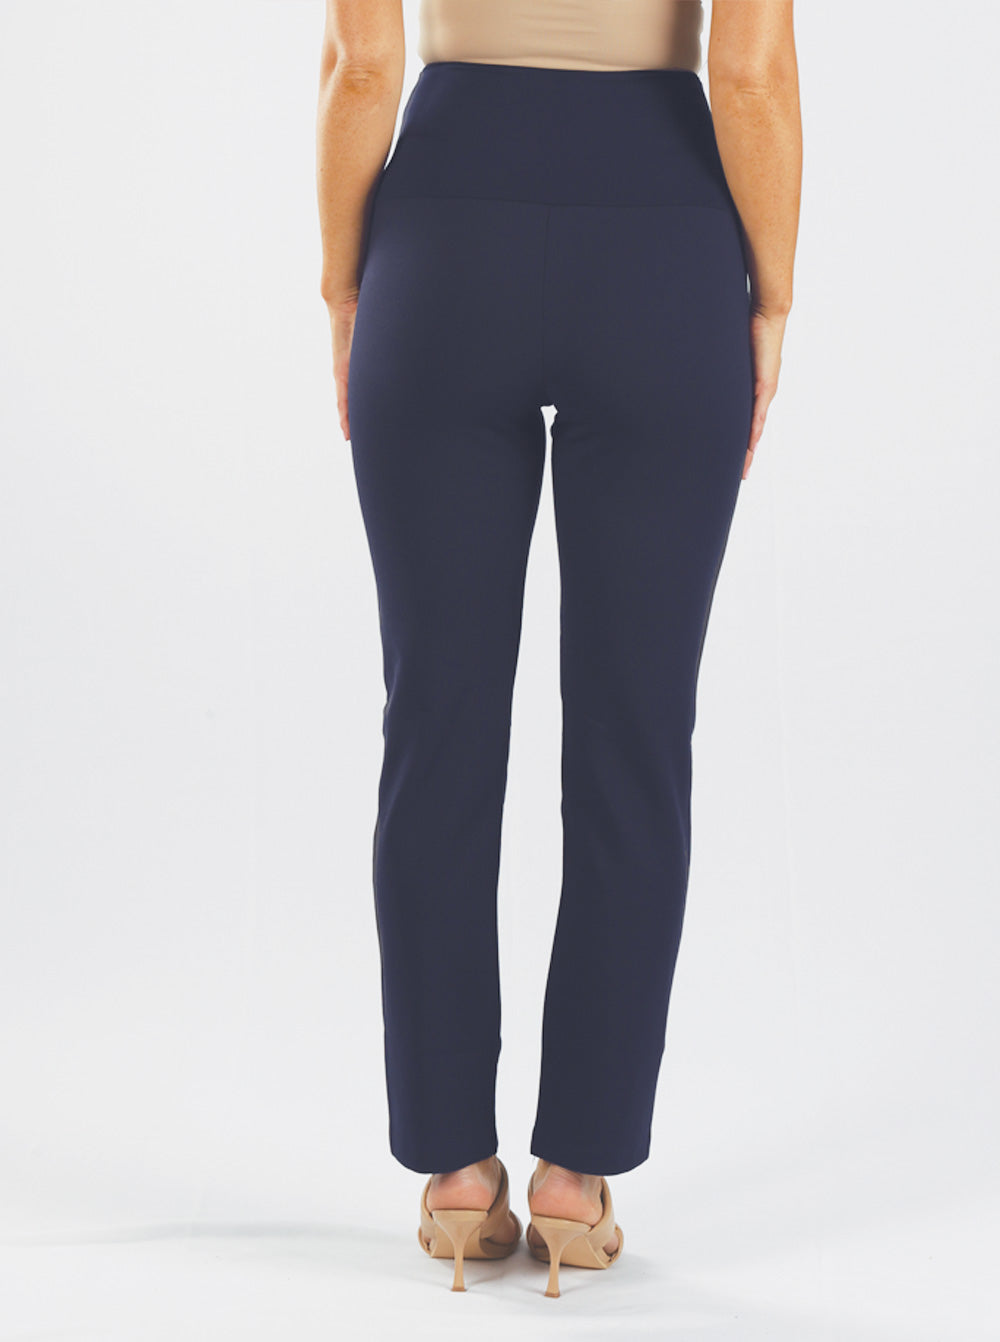 Service trousers for pregnant women - Uncompromising workwear -for women |  OPEROSE